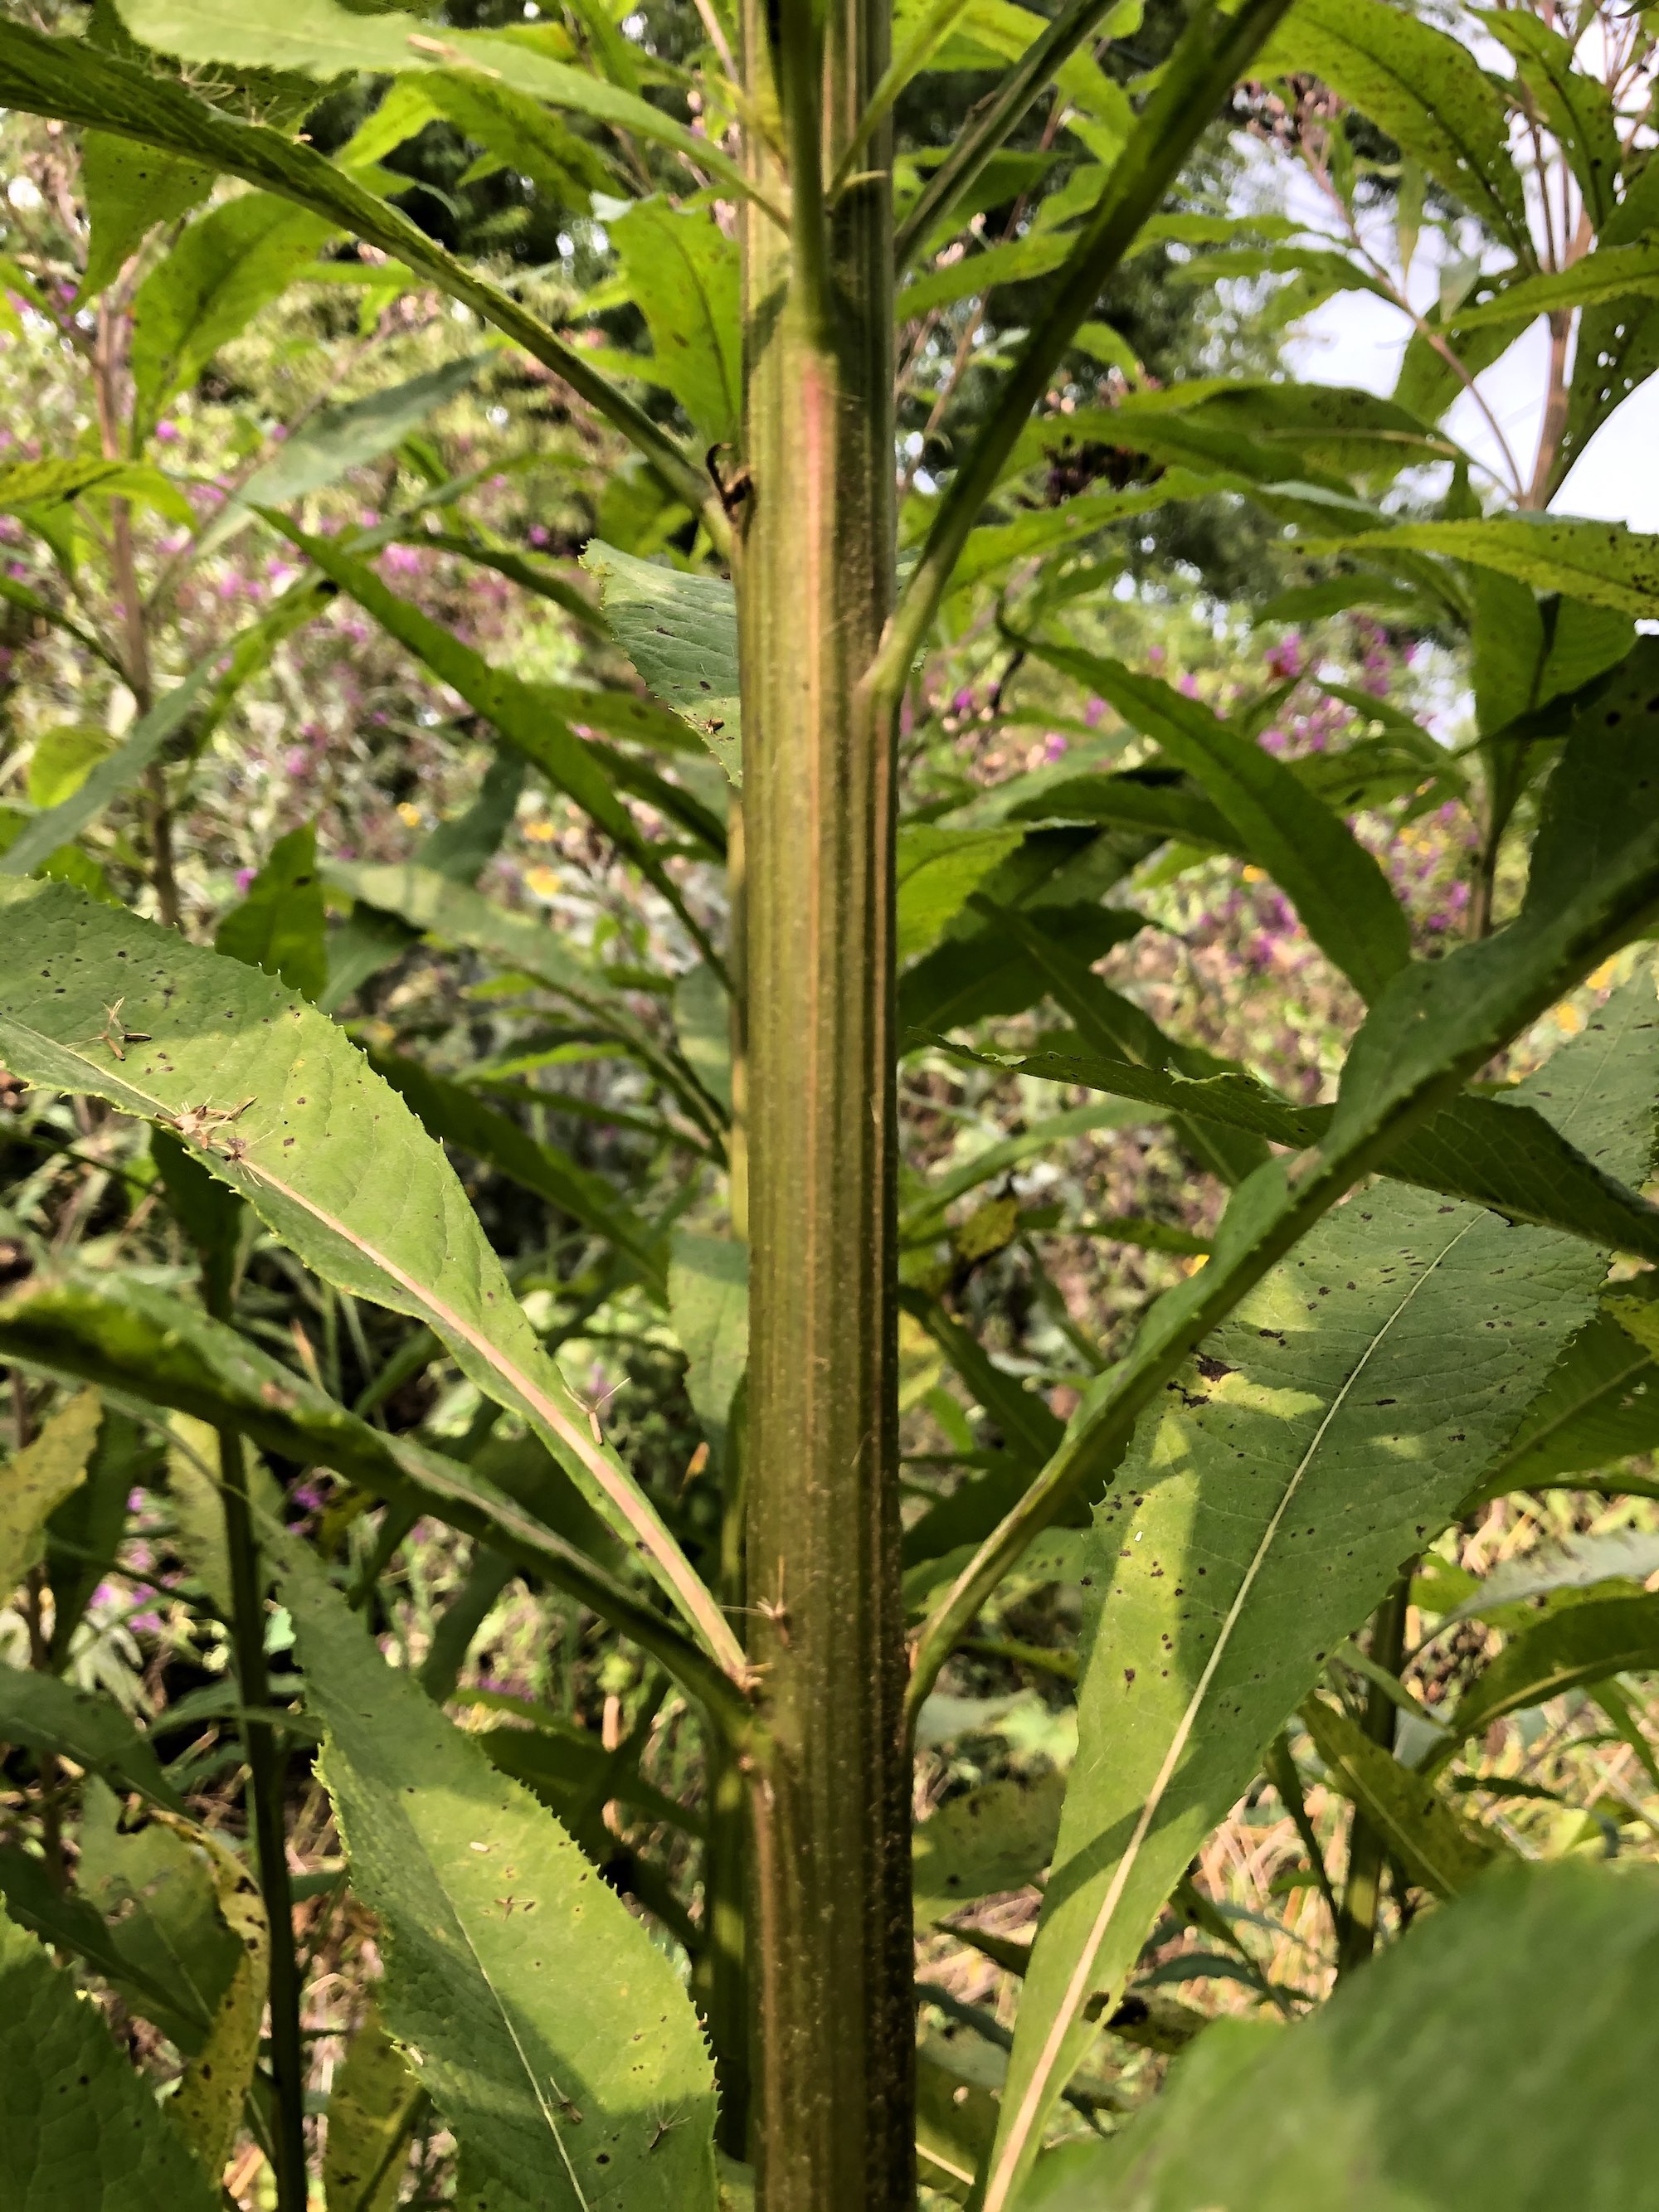 Tall Ironweed stalk in drainage ditch along bikepath between Midvale Blvd. and the Beltline on September 14, 2020.